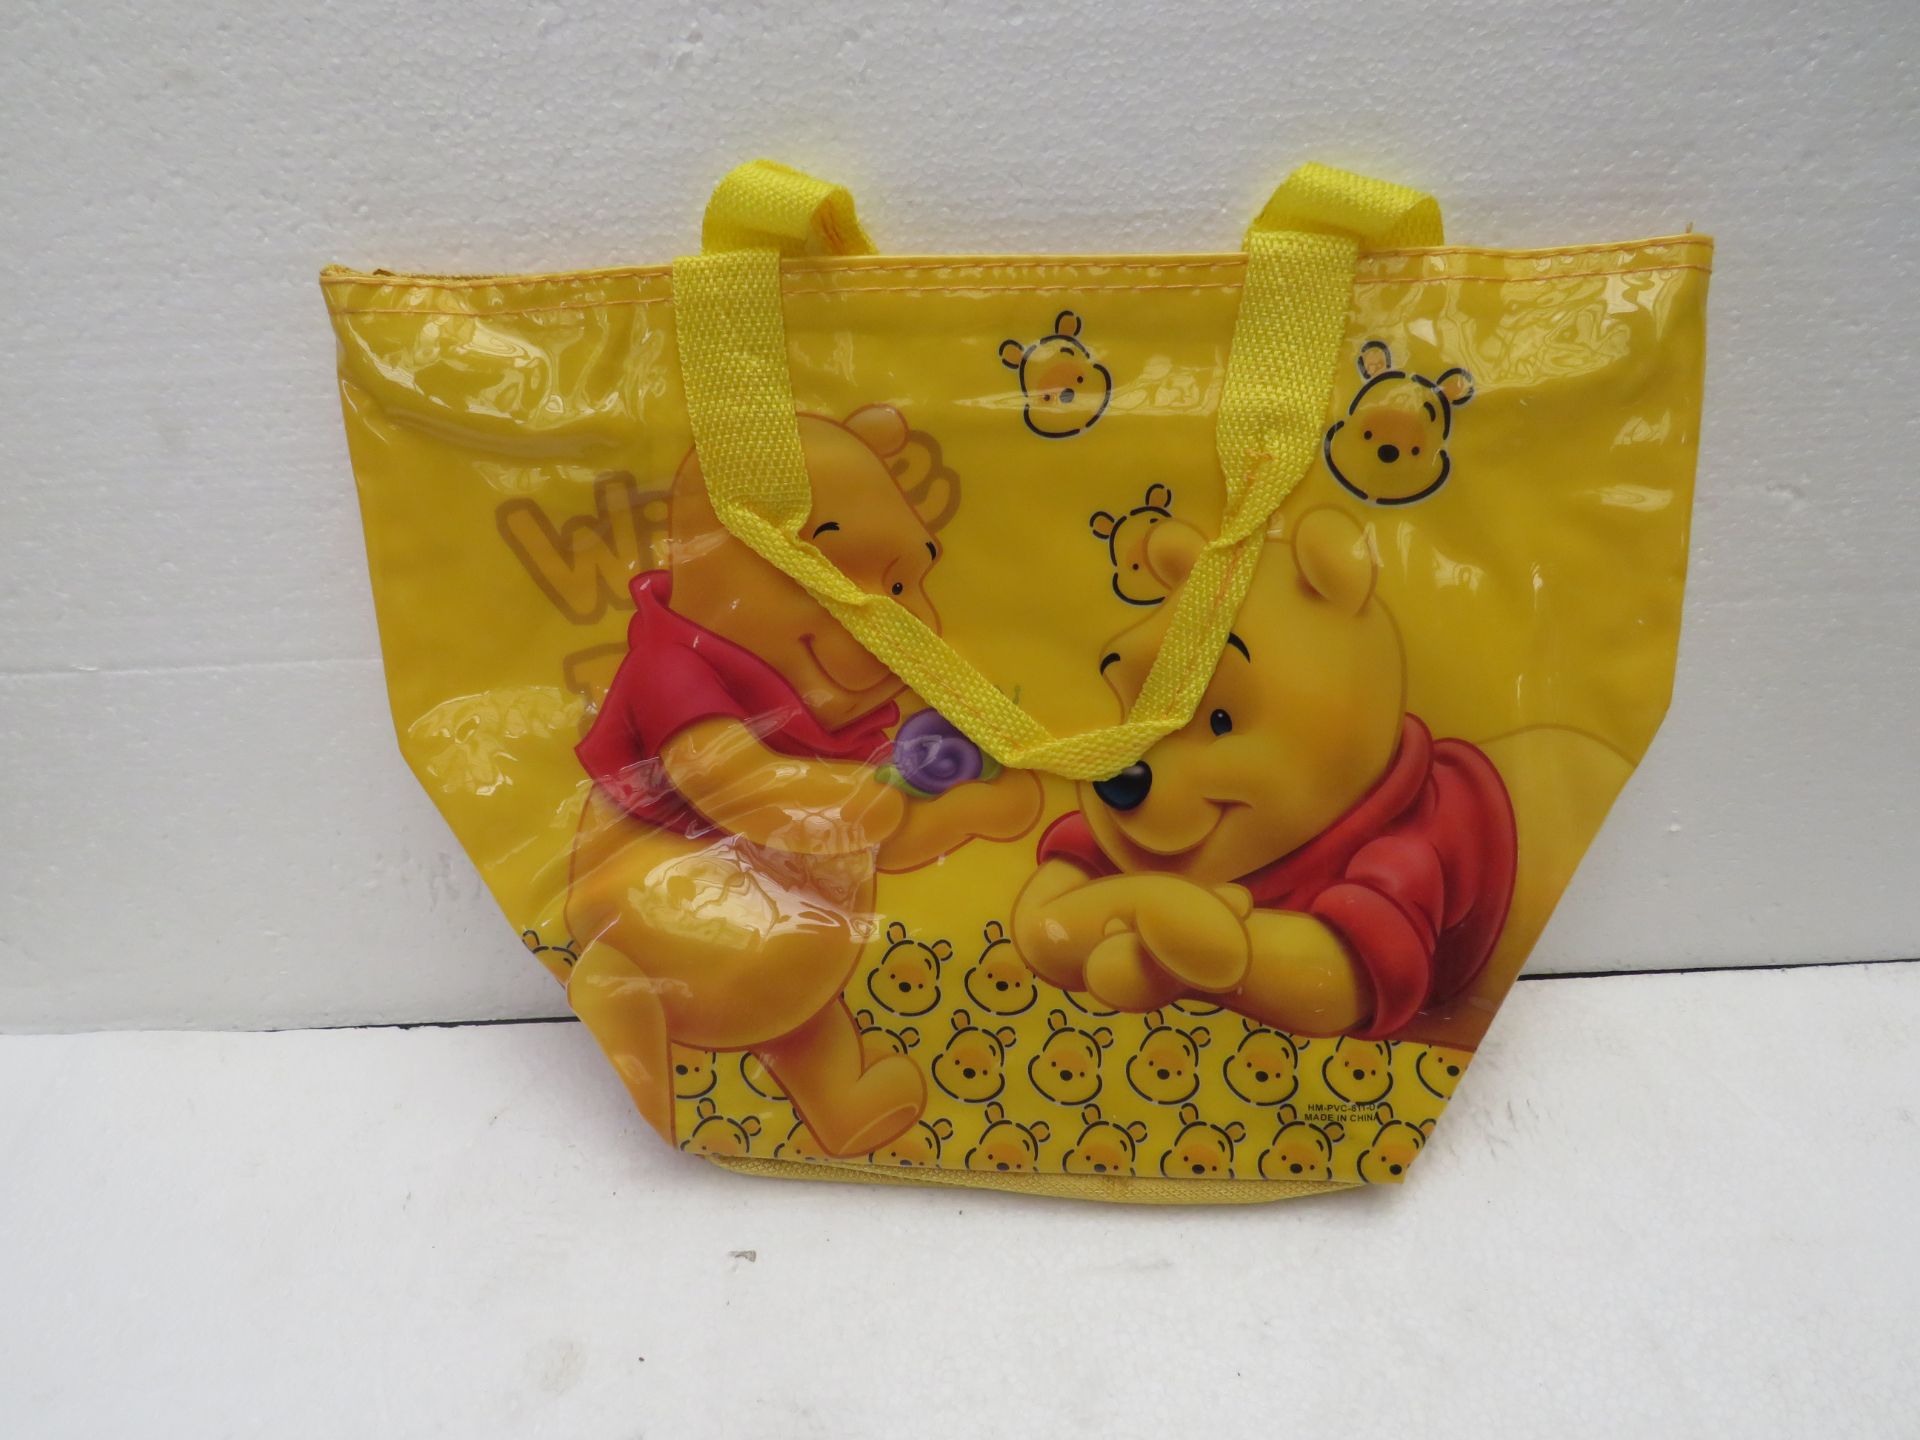 1X DISNEY WINNIE THE POOH CARRY ZIP BAG, UNCHECKED AND PACKAGE, SEE PICTURE